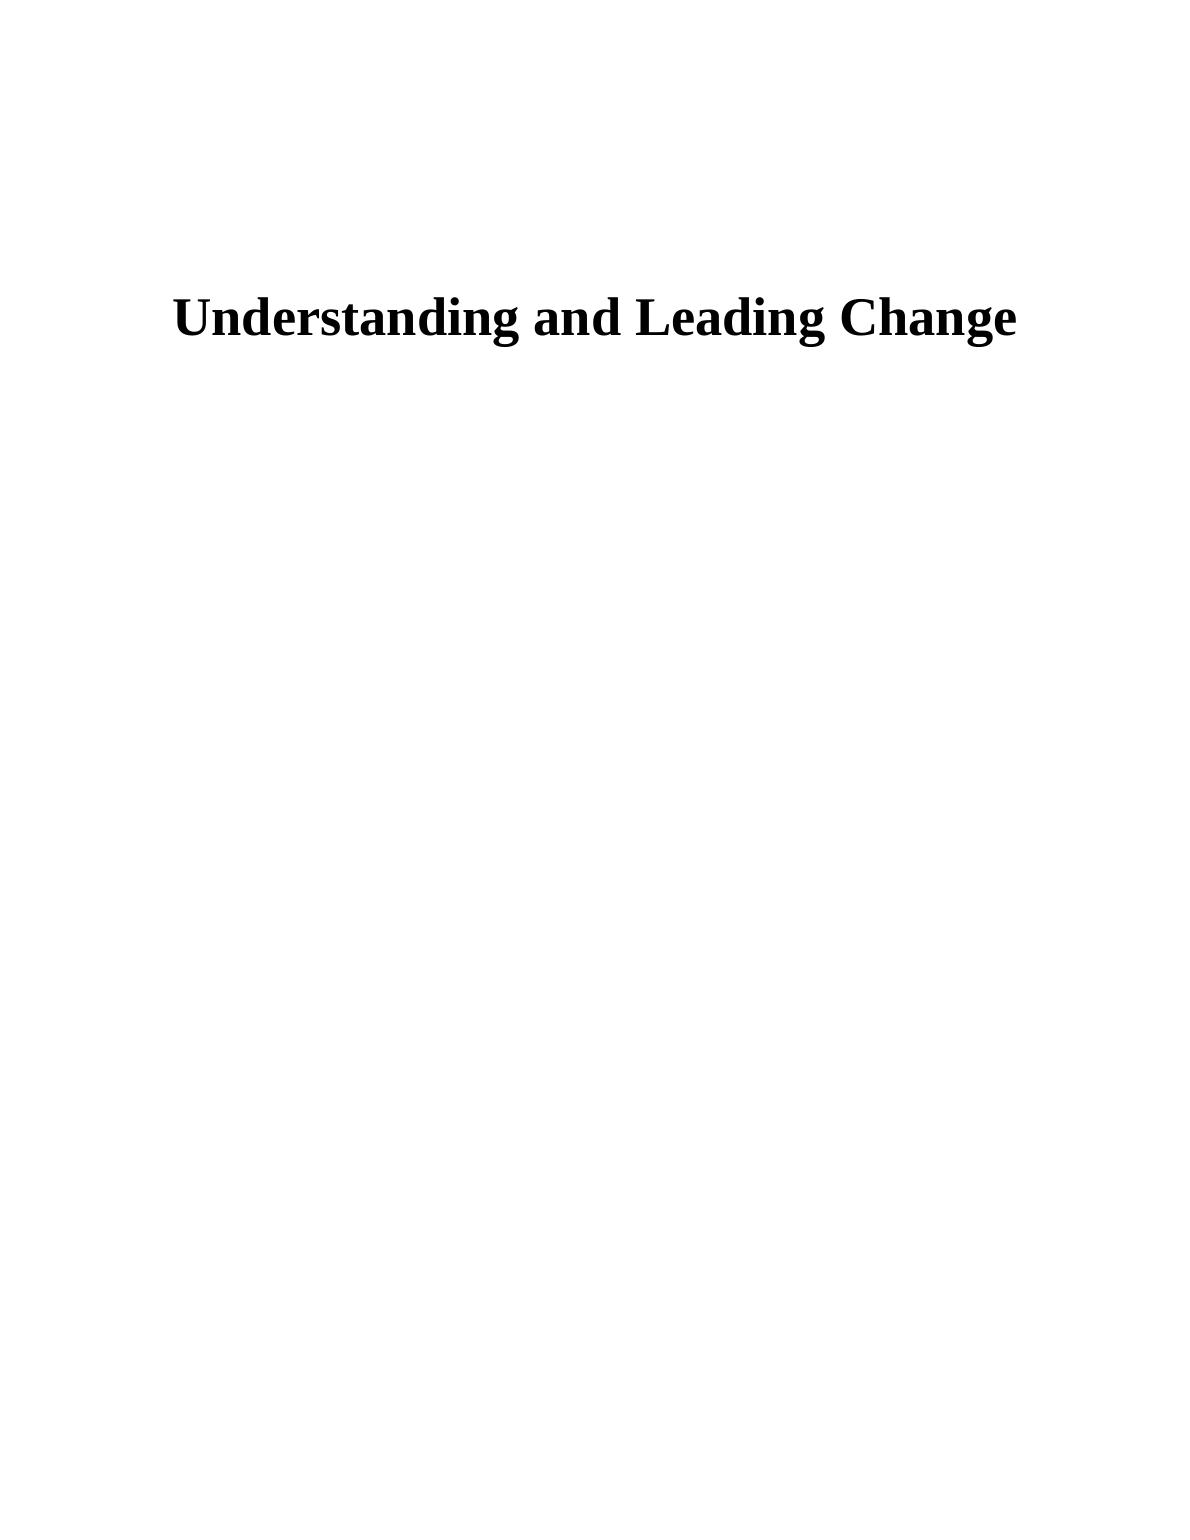 Understanding and Leading Change Assignment- Hilton & Marriott Hotel_1